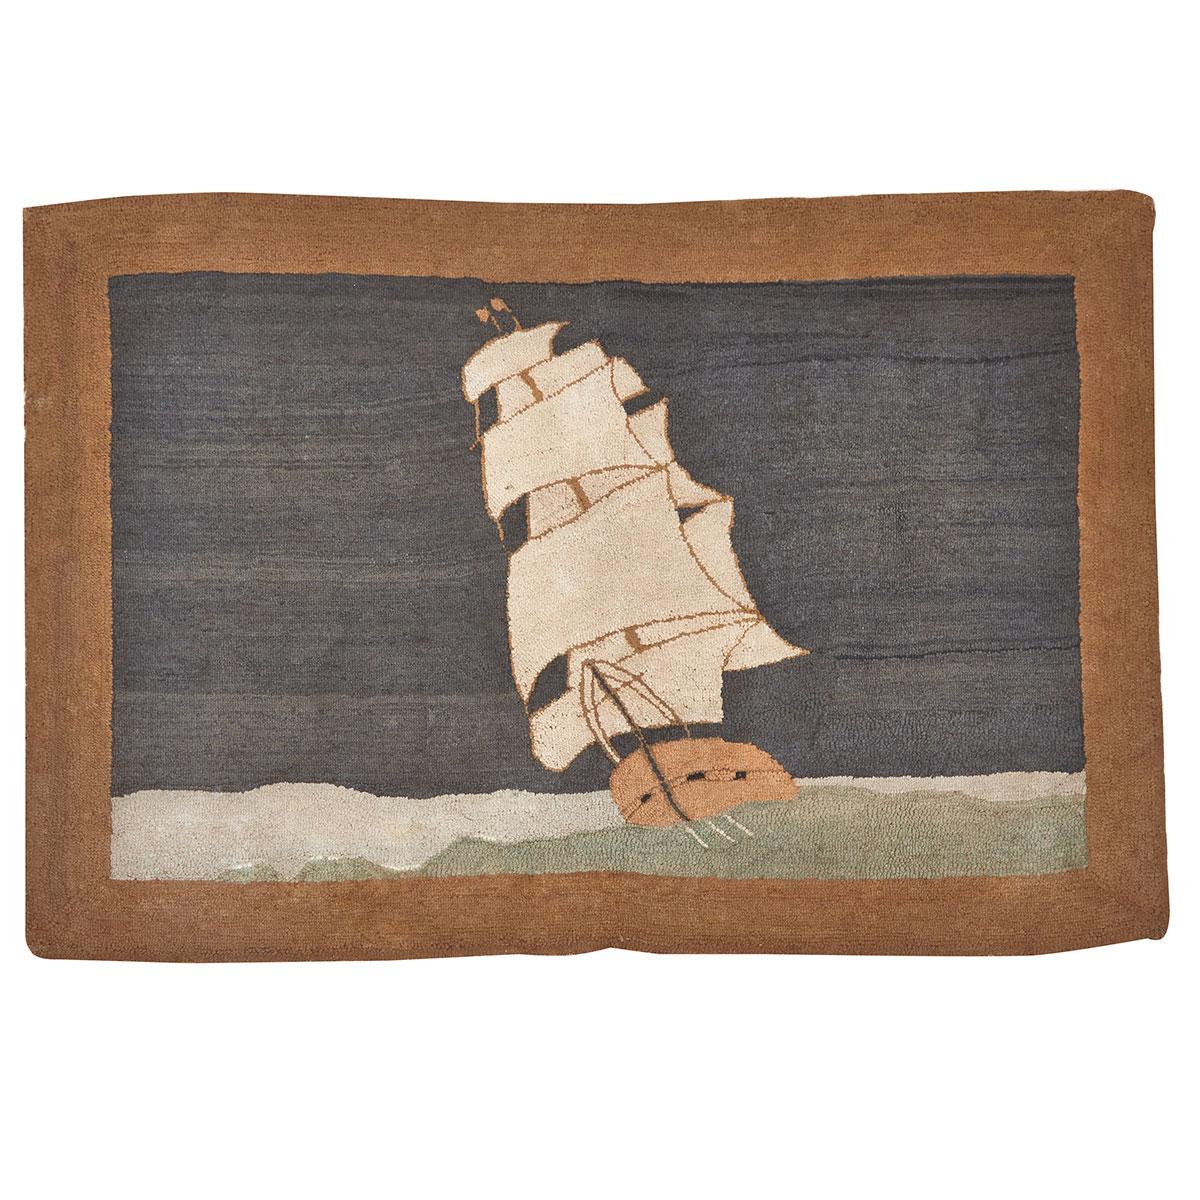 Early Grenfell Labrador Industries Hooked Mat, 1st quarter, 20th century